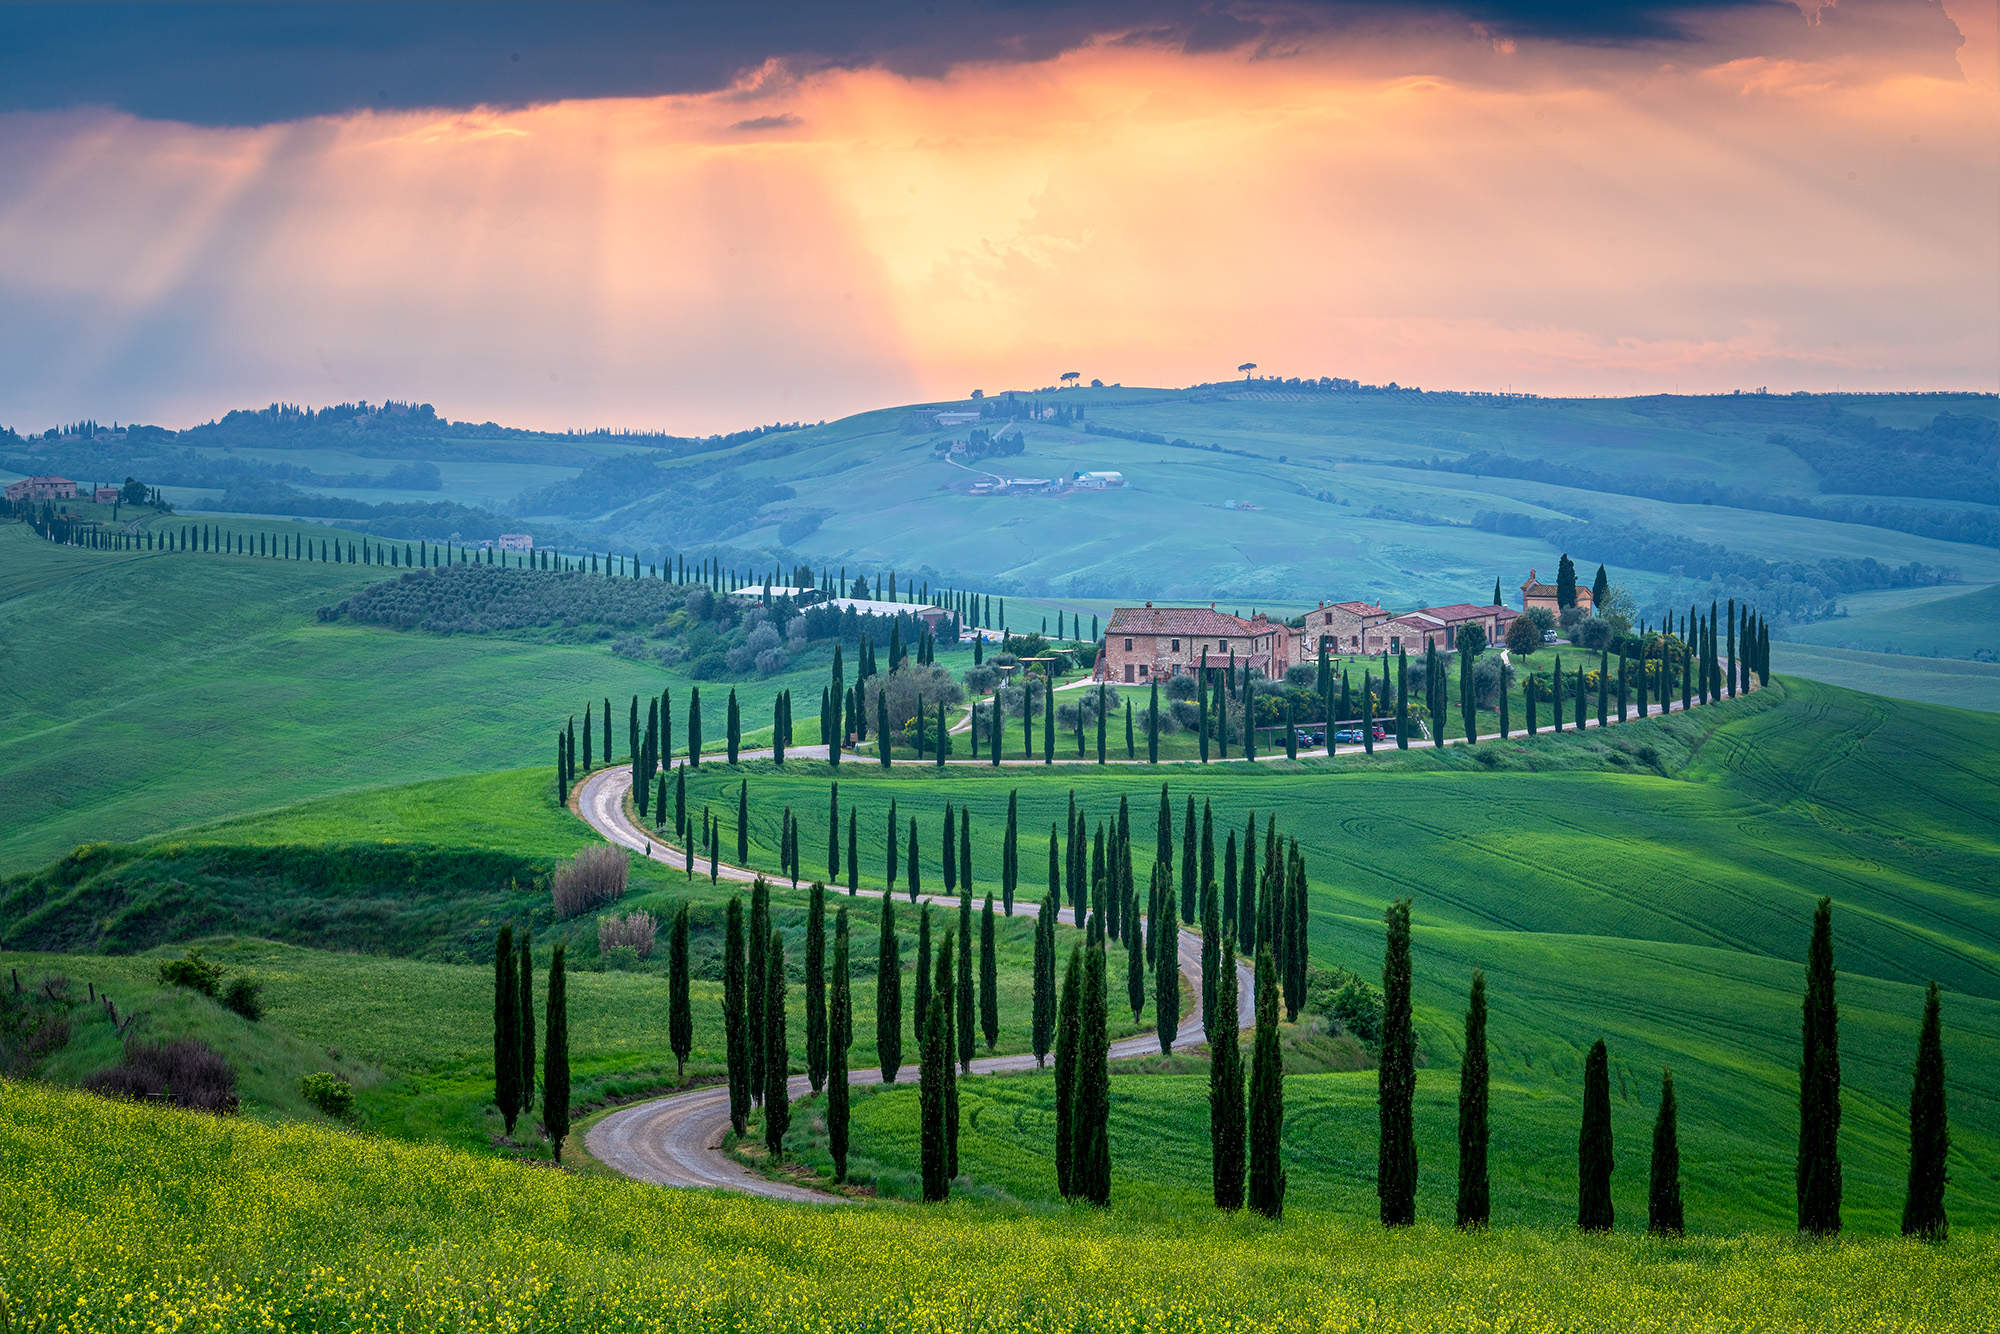 Taken during sunset in the rural Tuscan countryside, this image showcases the lush greenery and occasional fog characteristic...